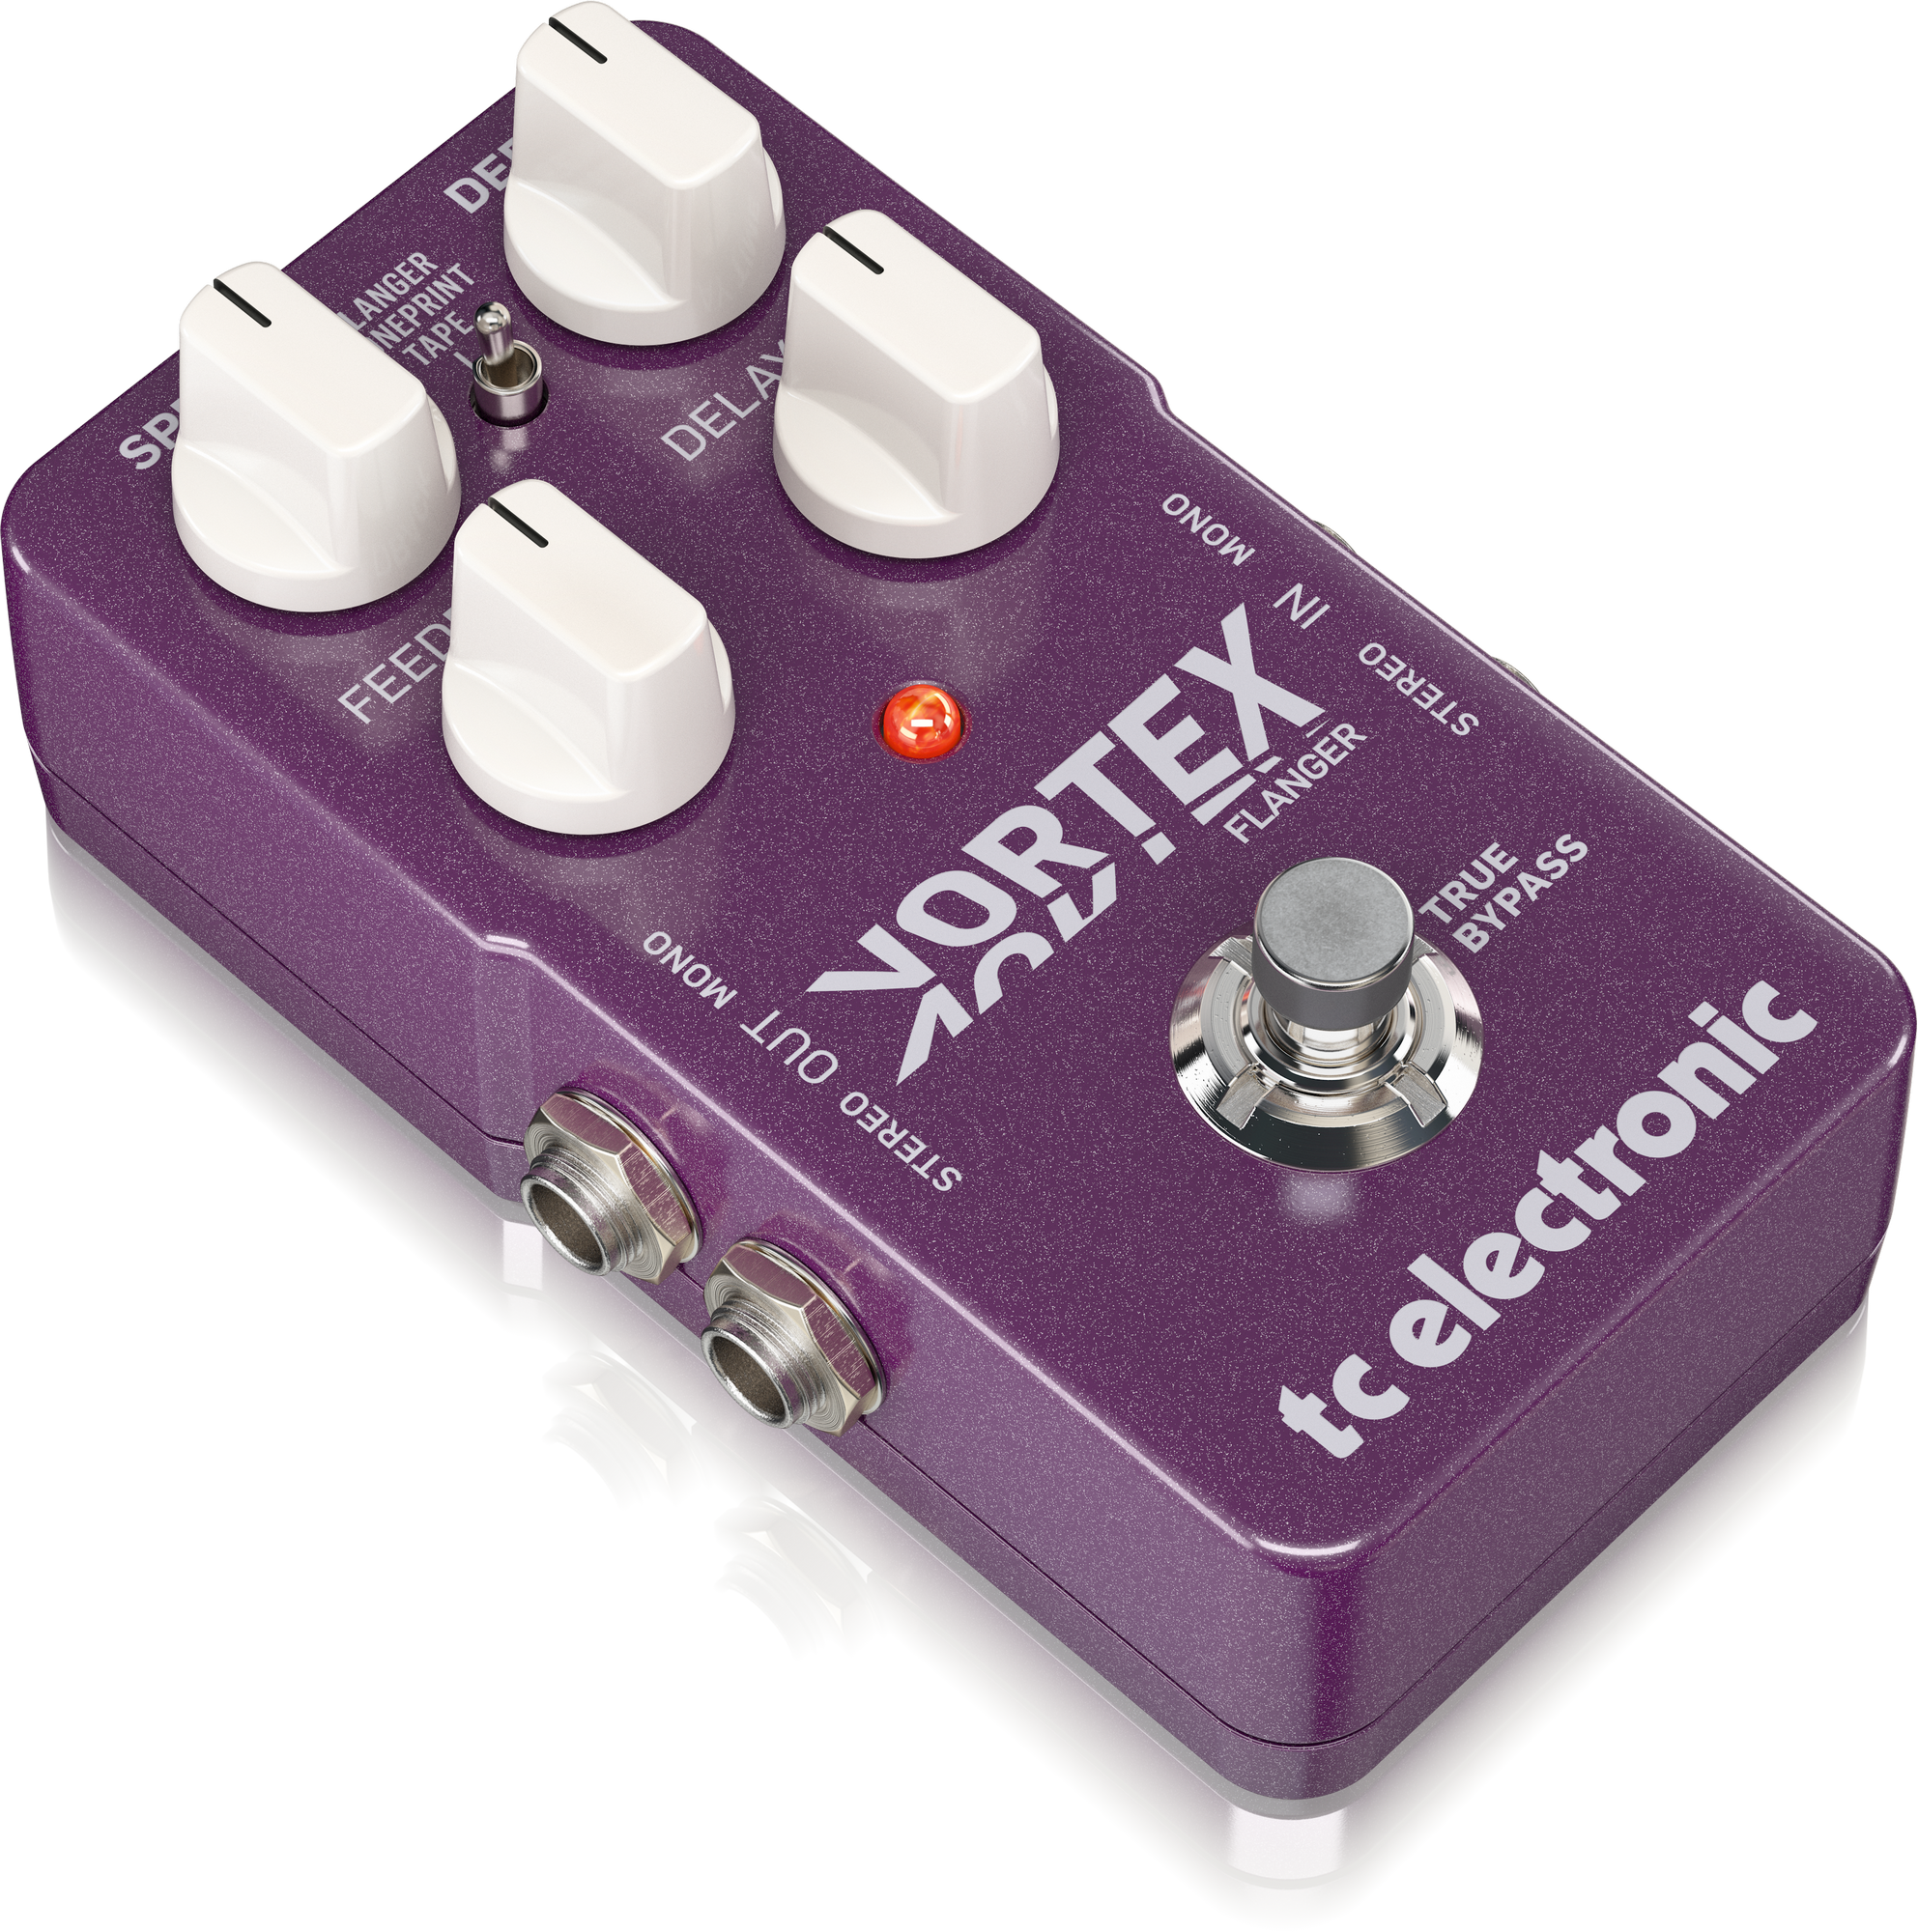 TC Electronic Vortex Flanger Outstanding Toneprint-enabled Flanger Pedal With 2 Built-in Flanger Modes, Deep Control And Stereo I/o, TC ELECTRONIC, EFFECTS, tc-electronic-effects-tc-vortex-flanger, ZOSO MUSIC SDN BHD